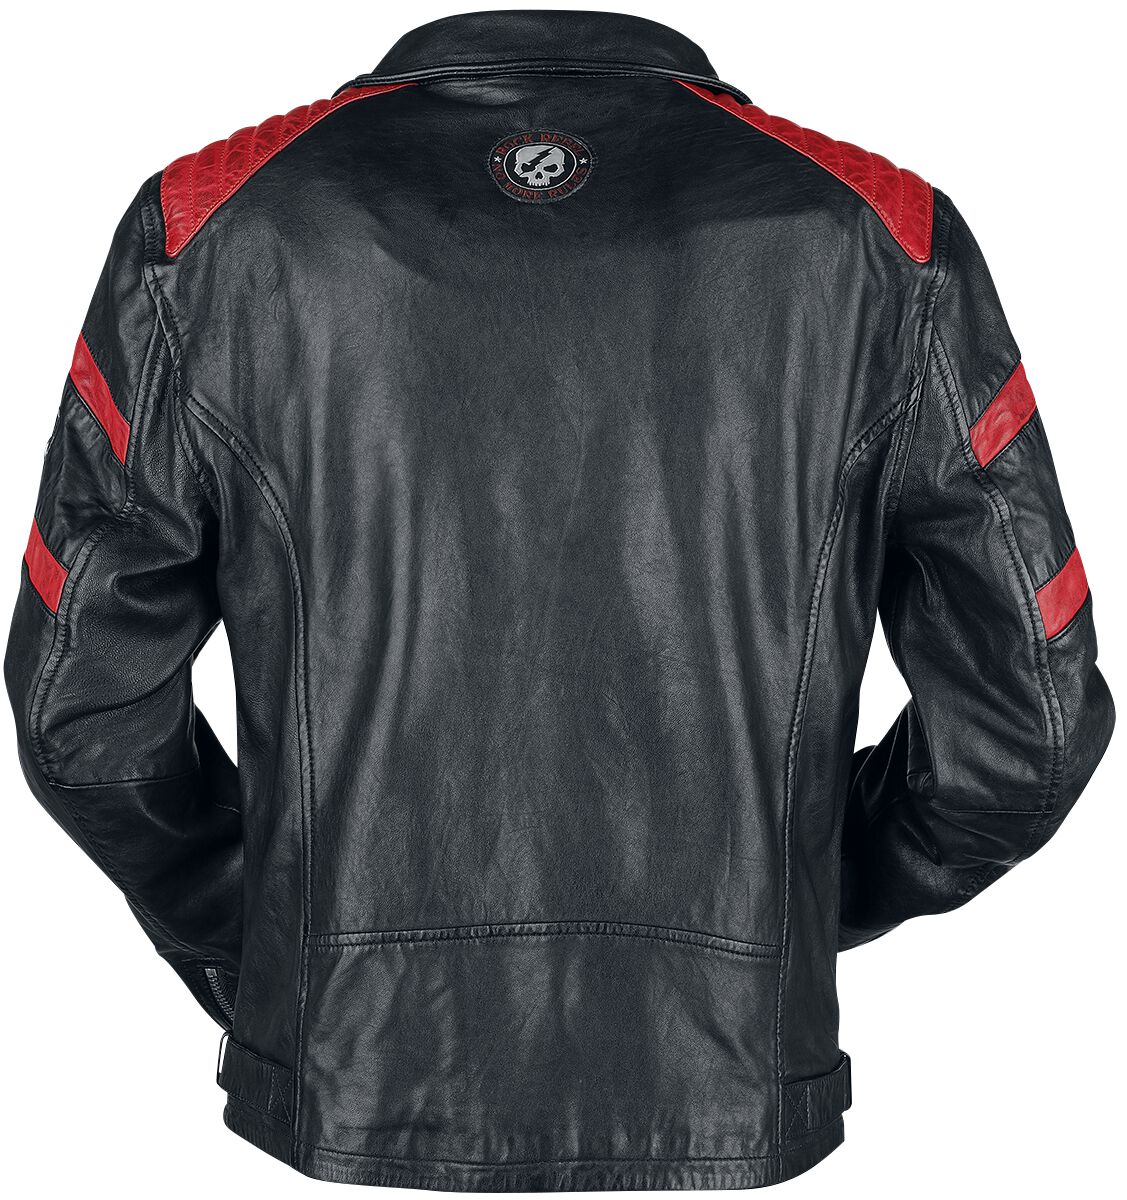 Biker New Fashion Black and Red Leather Jacket Mens - Jackets Masters